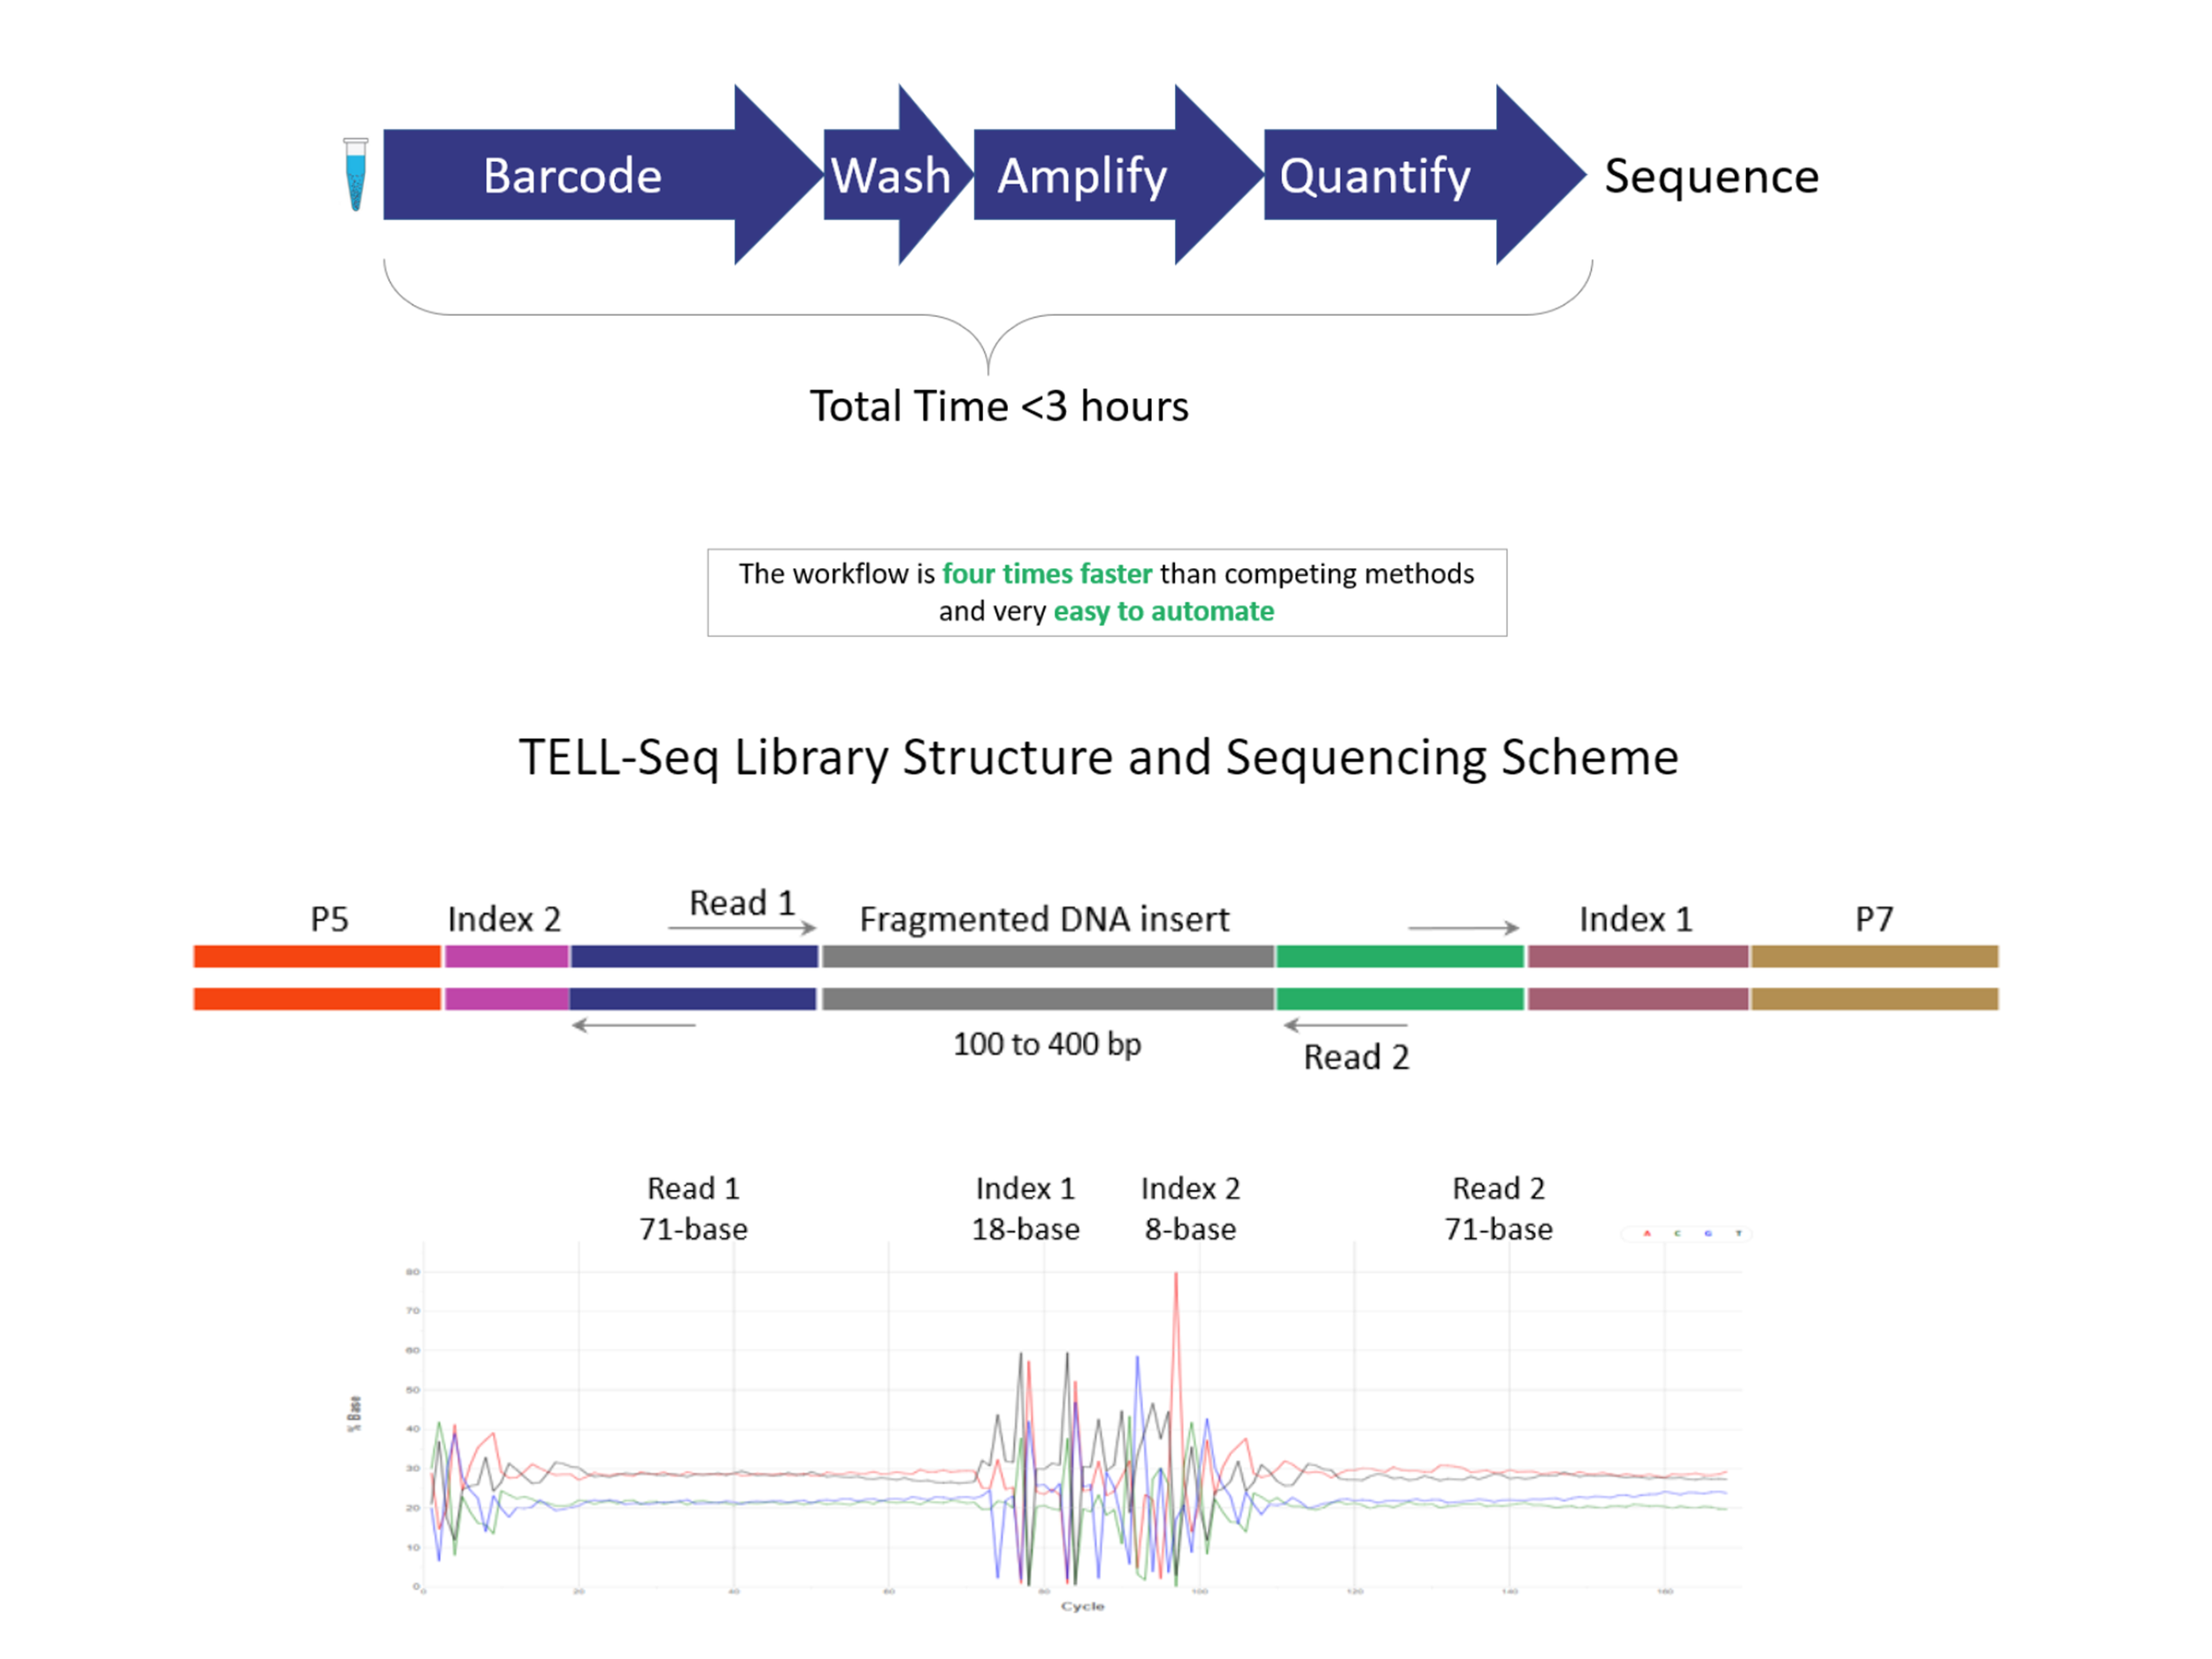 TELL-Seq Library Preparation and Sequencing Workflow